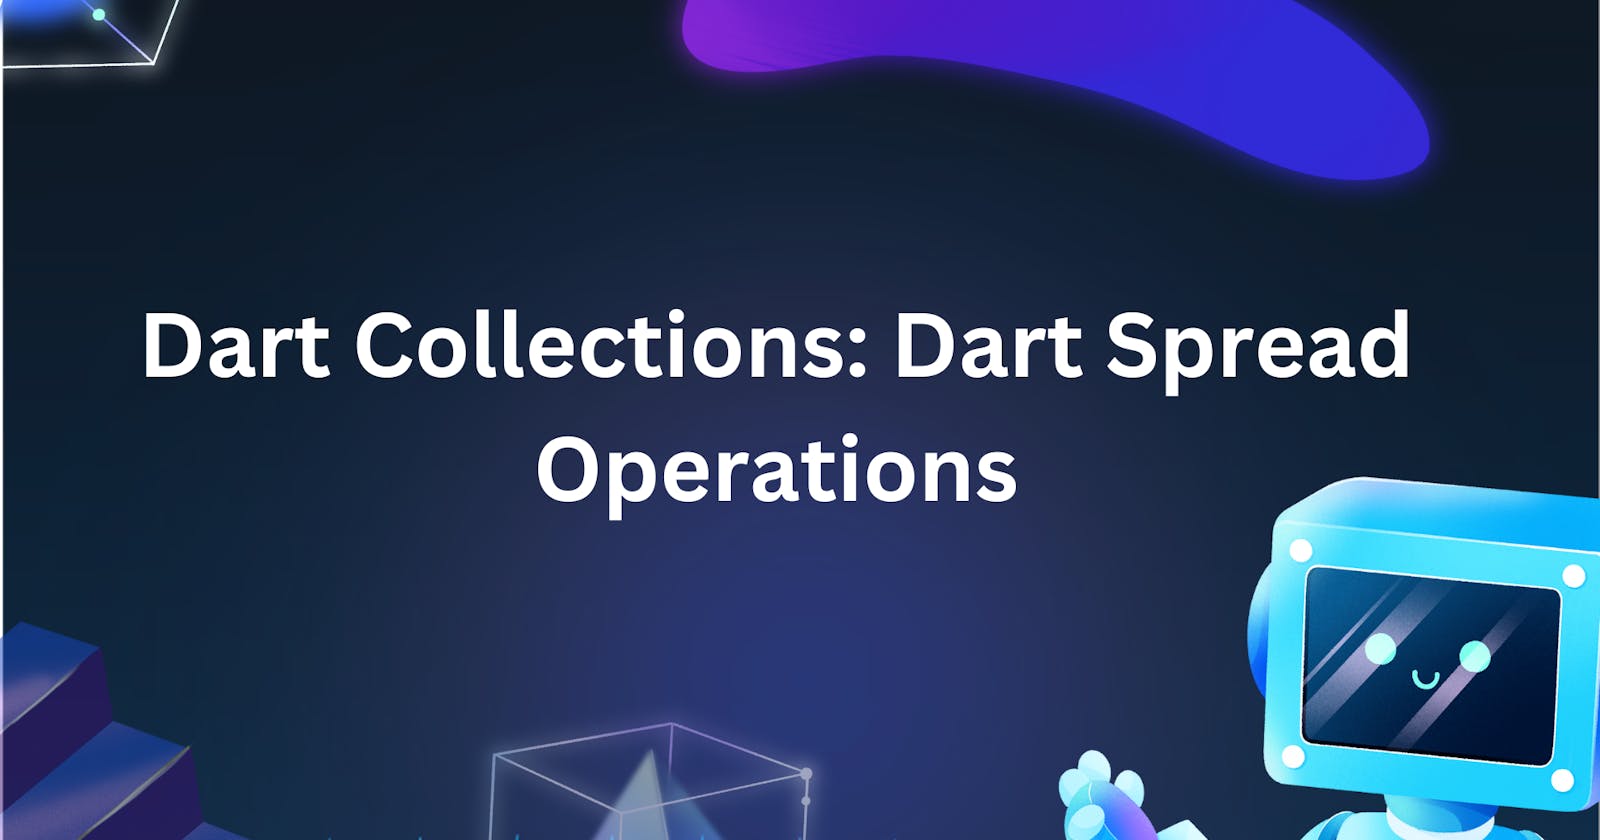 Dart Collections: Dart Spread Operations